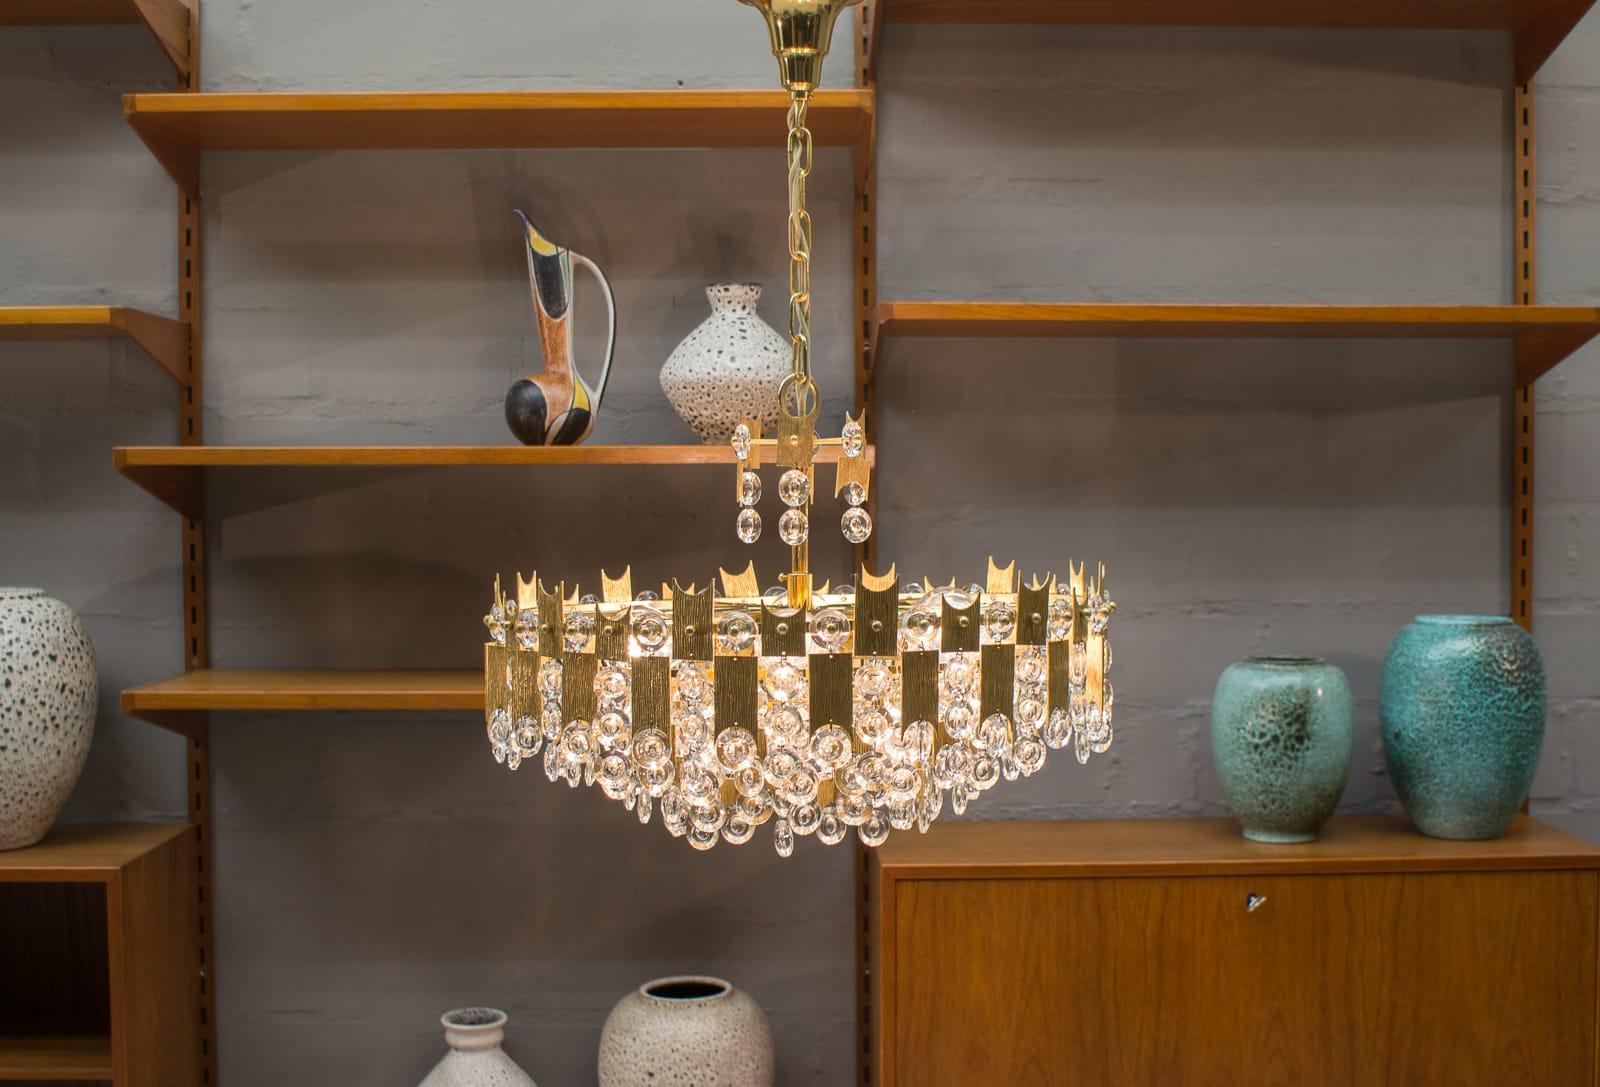 Fabulous 1960s 24-karat gold-plated and crystal glass chandelier by Palwa (Palme & Walter) of Germany. 
 This is a statement piece that explodes prism light when lit.
     